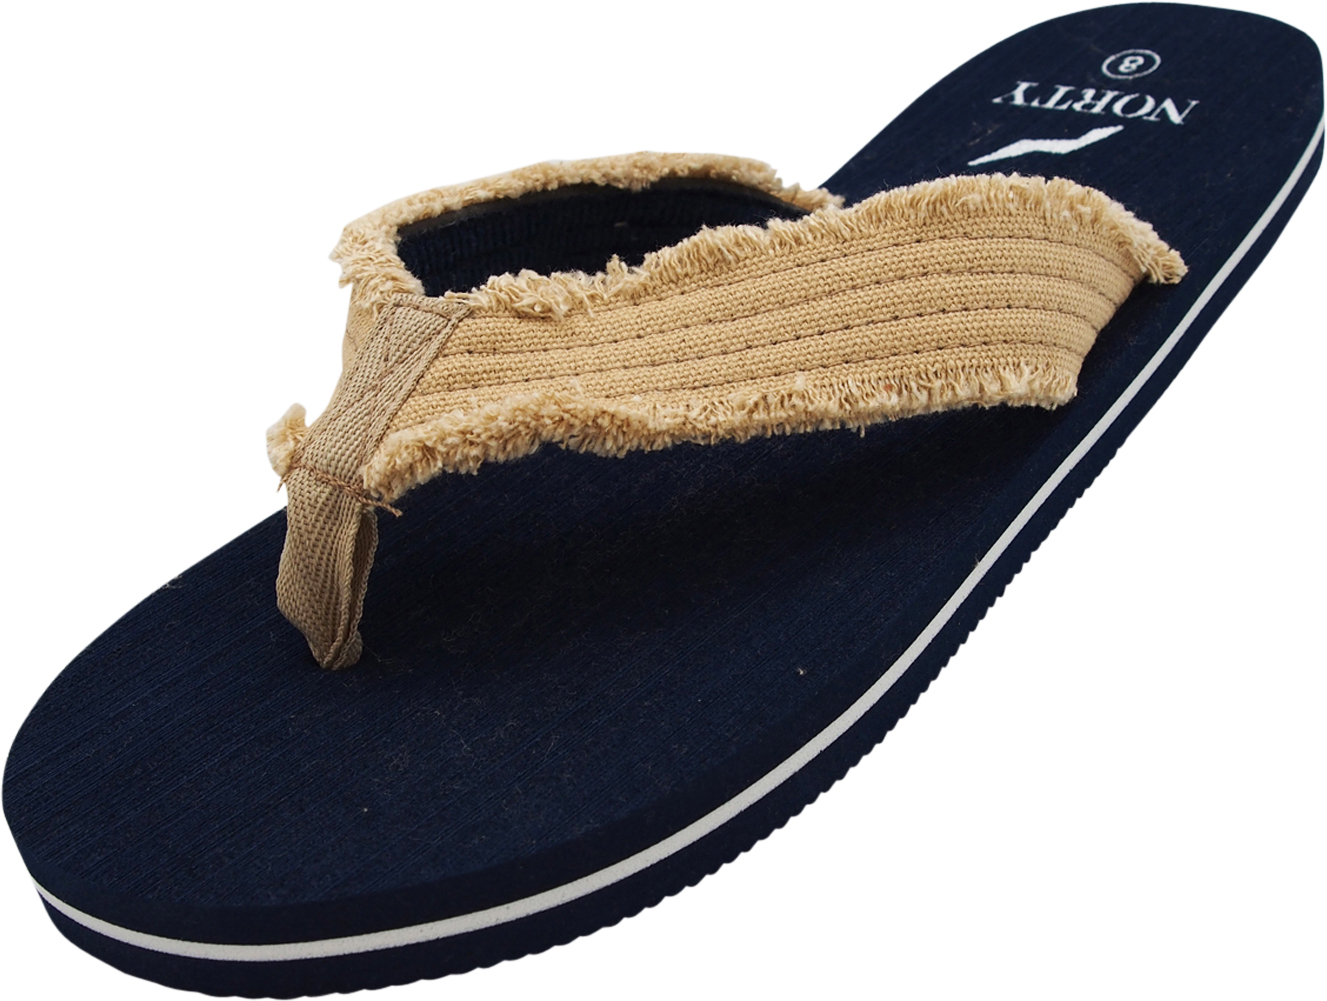 NORTY Mens Flip Flops Adult Male Beach Thong Sandals Navy - image 1 of 7